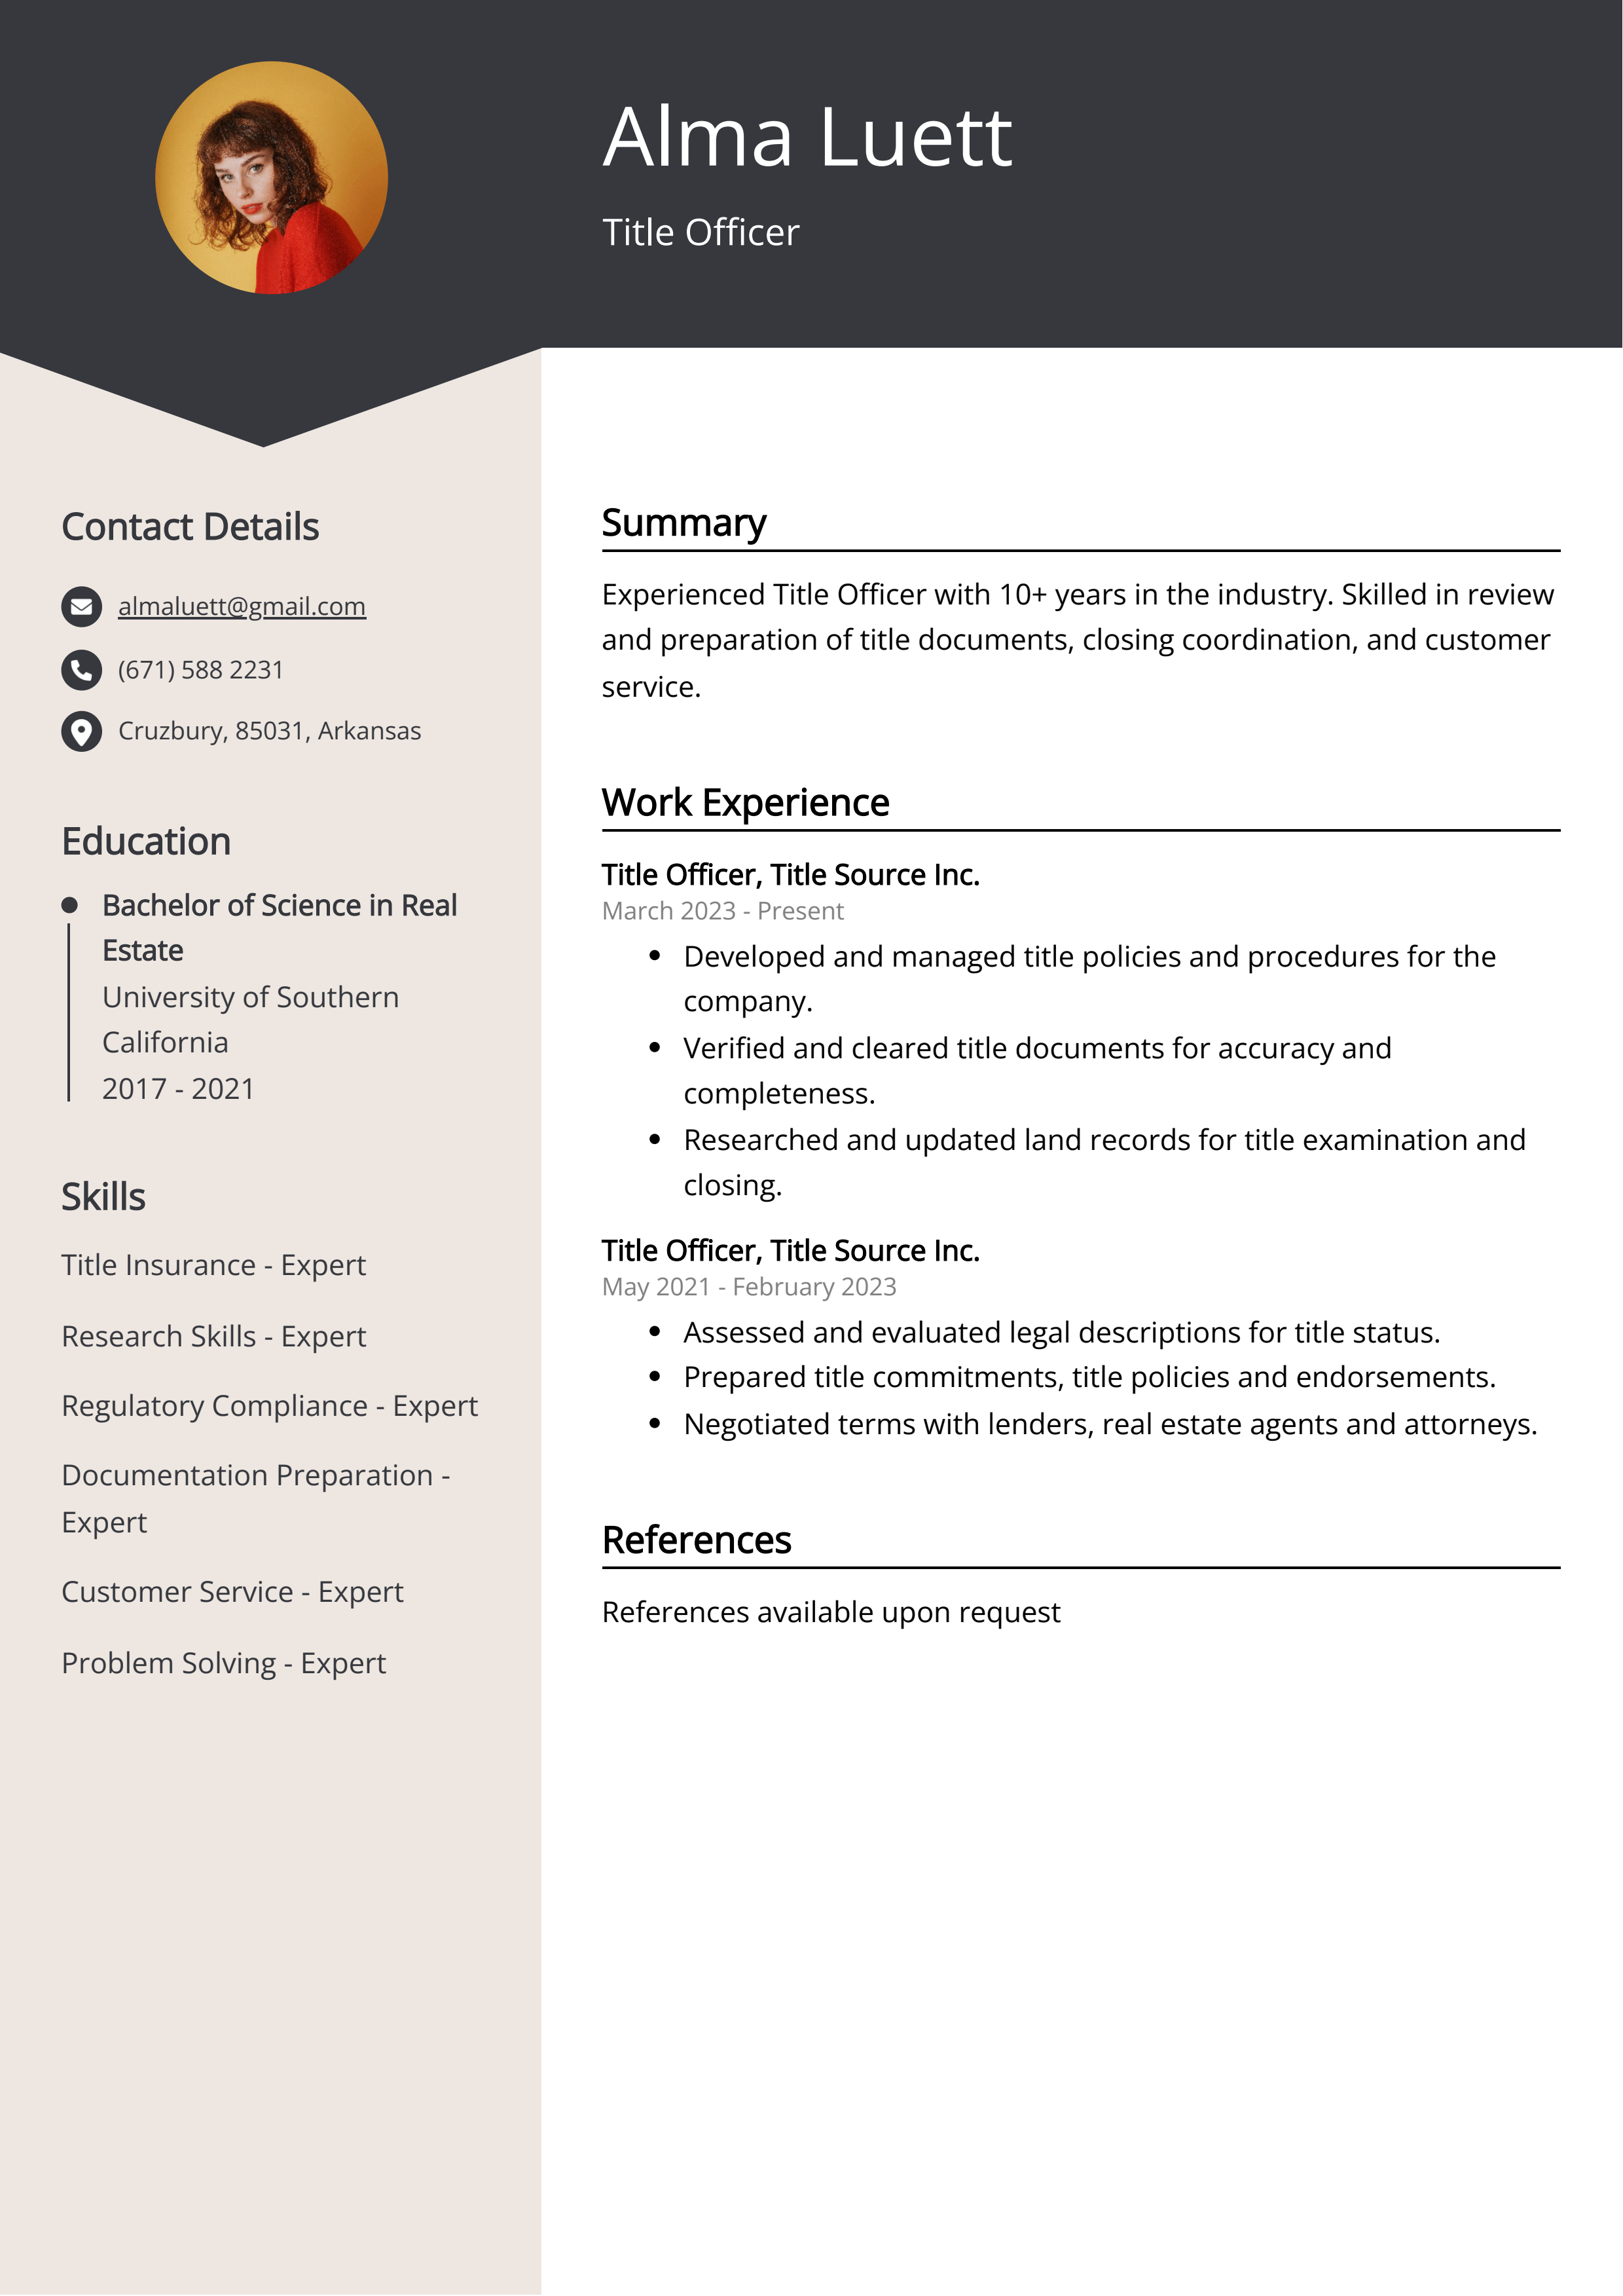 Title Officer CV Example